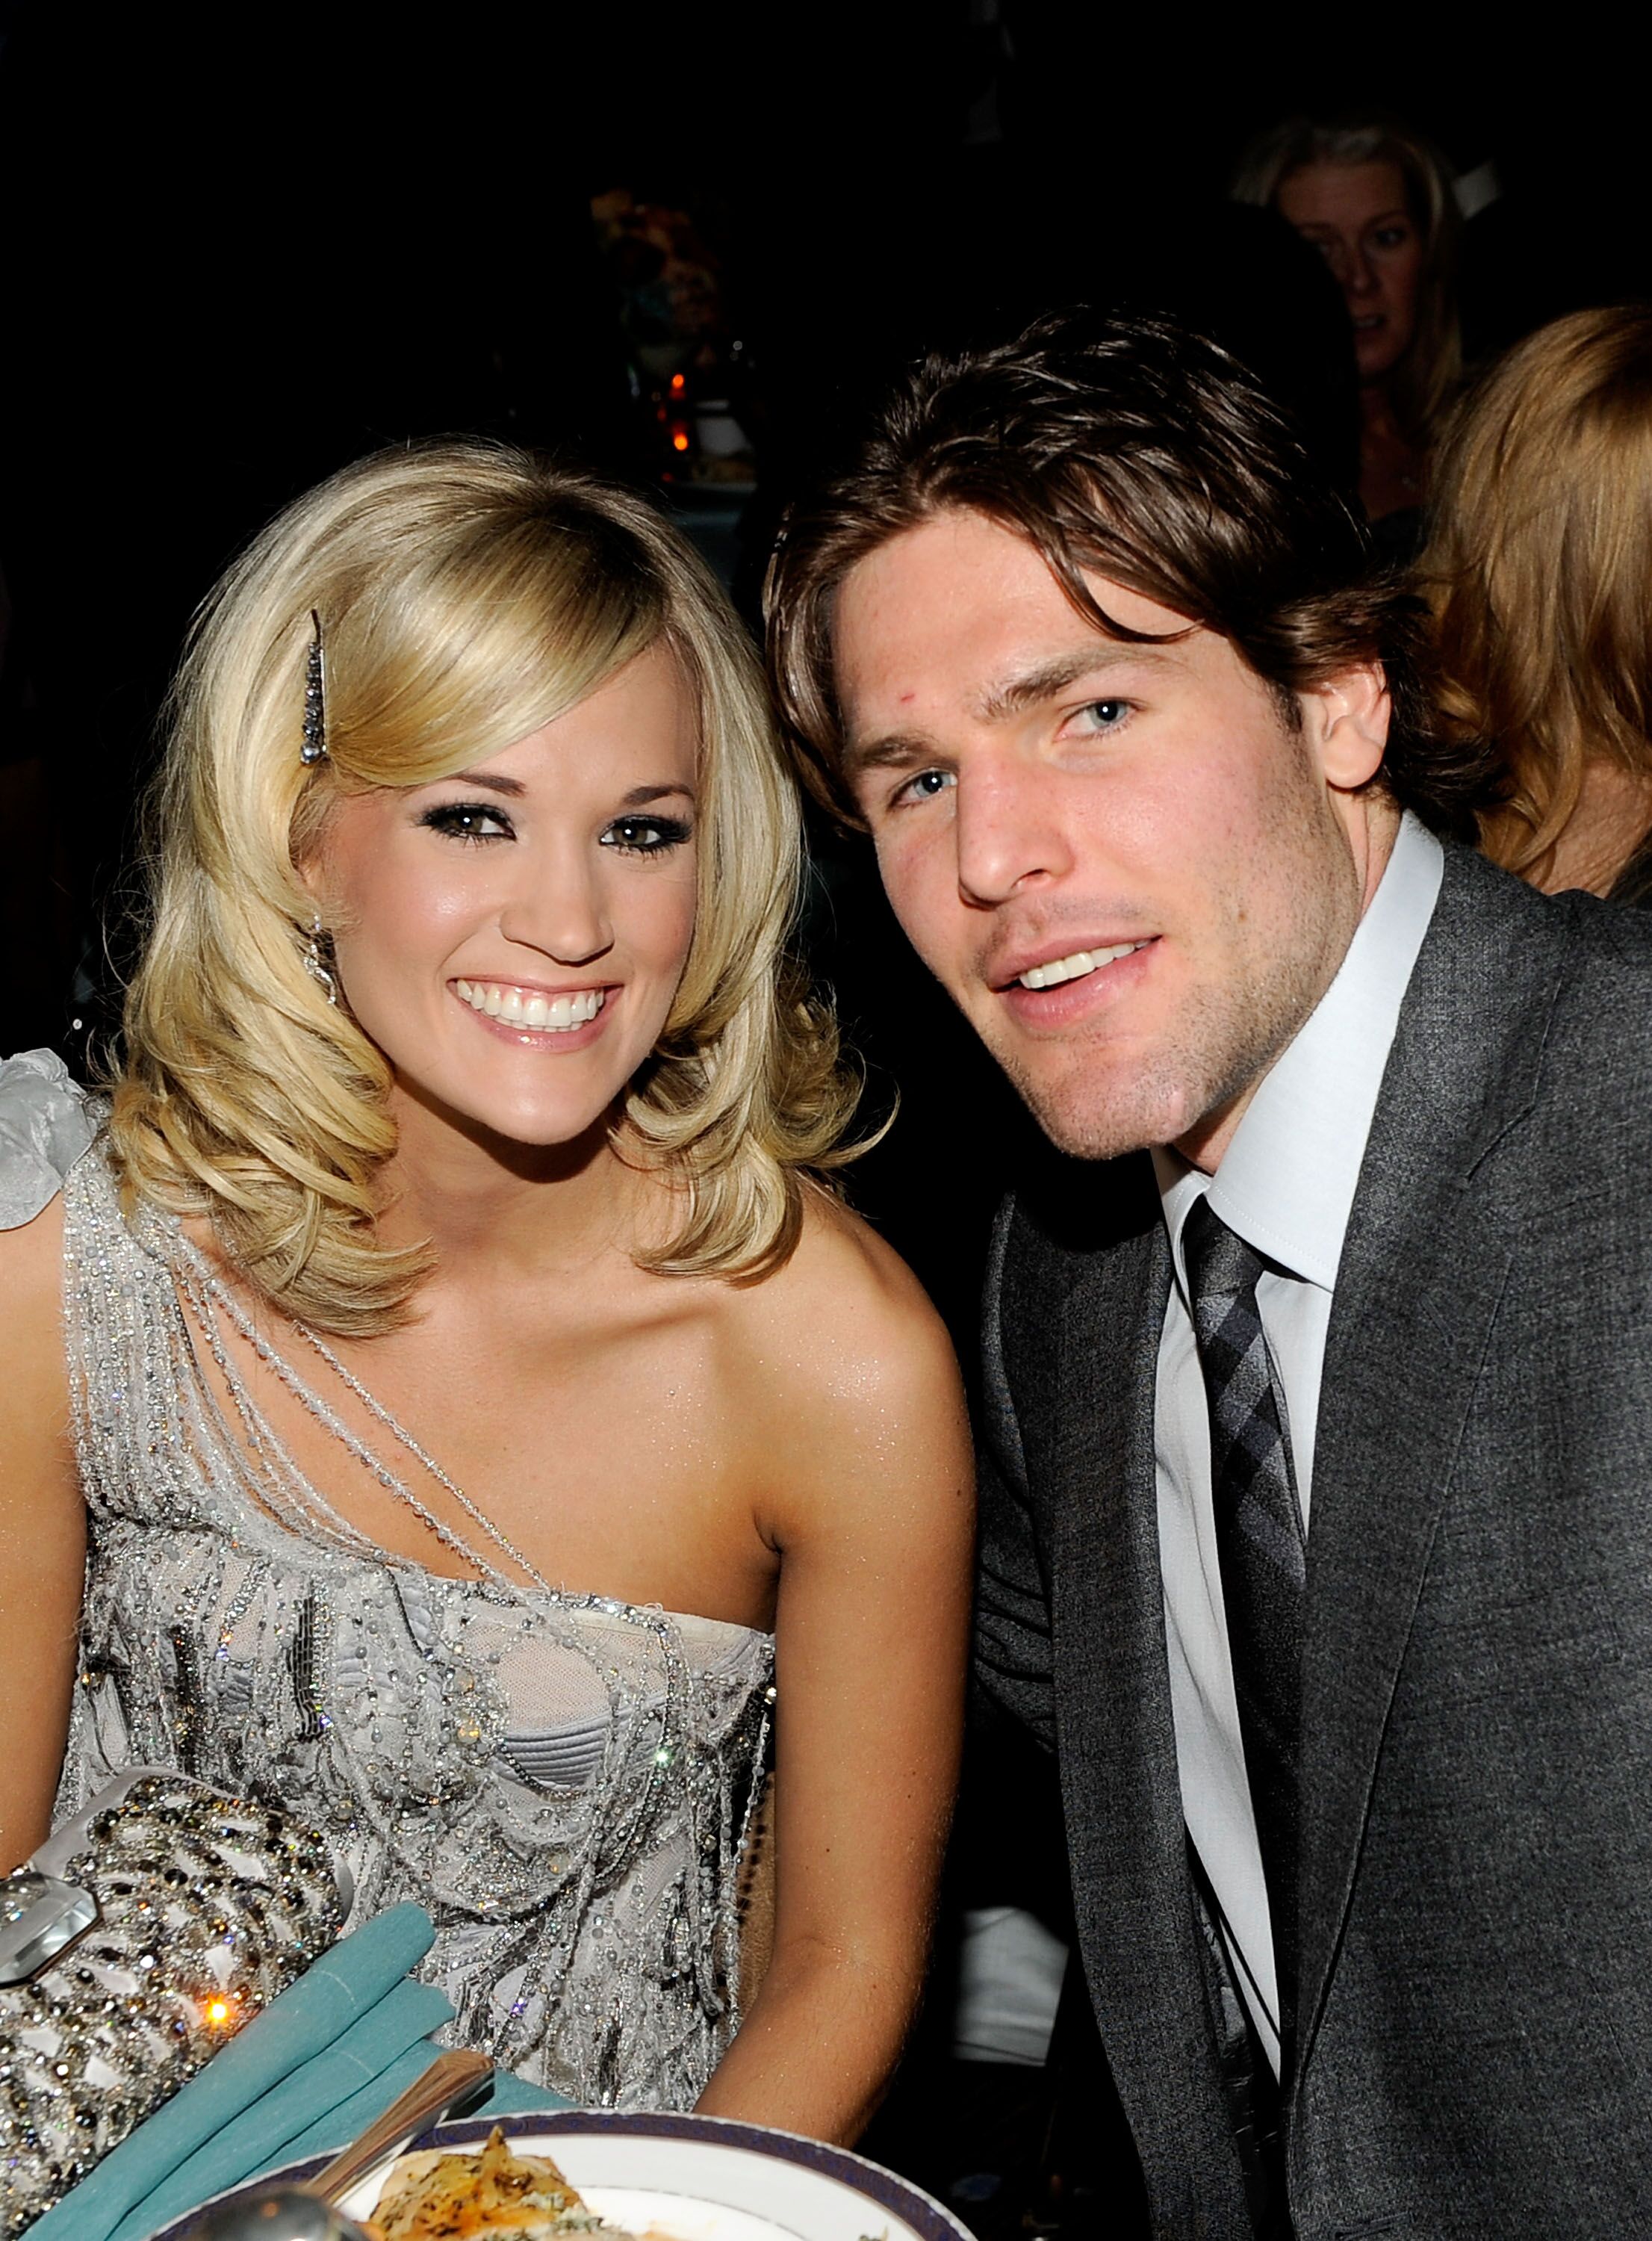 Singer Carrie Underwood and husband Mike Fisher at the 52nd Annual GRAMMY Awards | Source: Getty Images